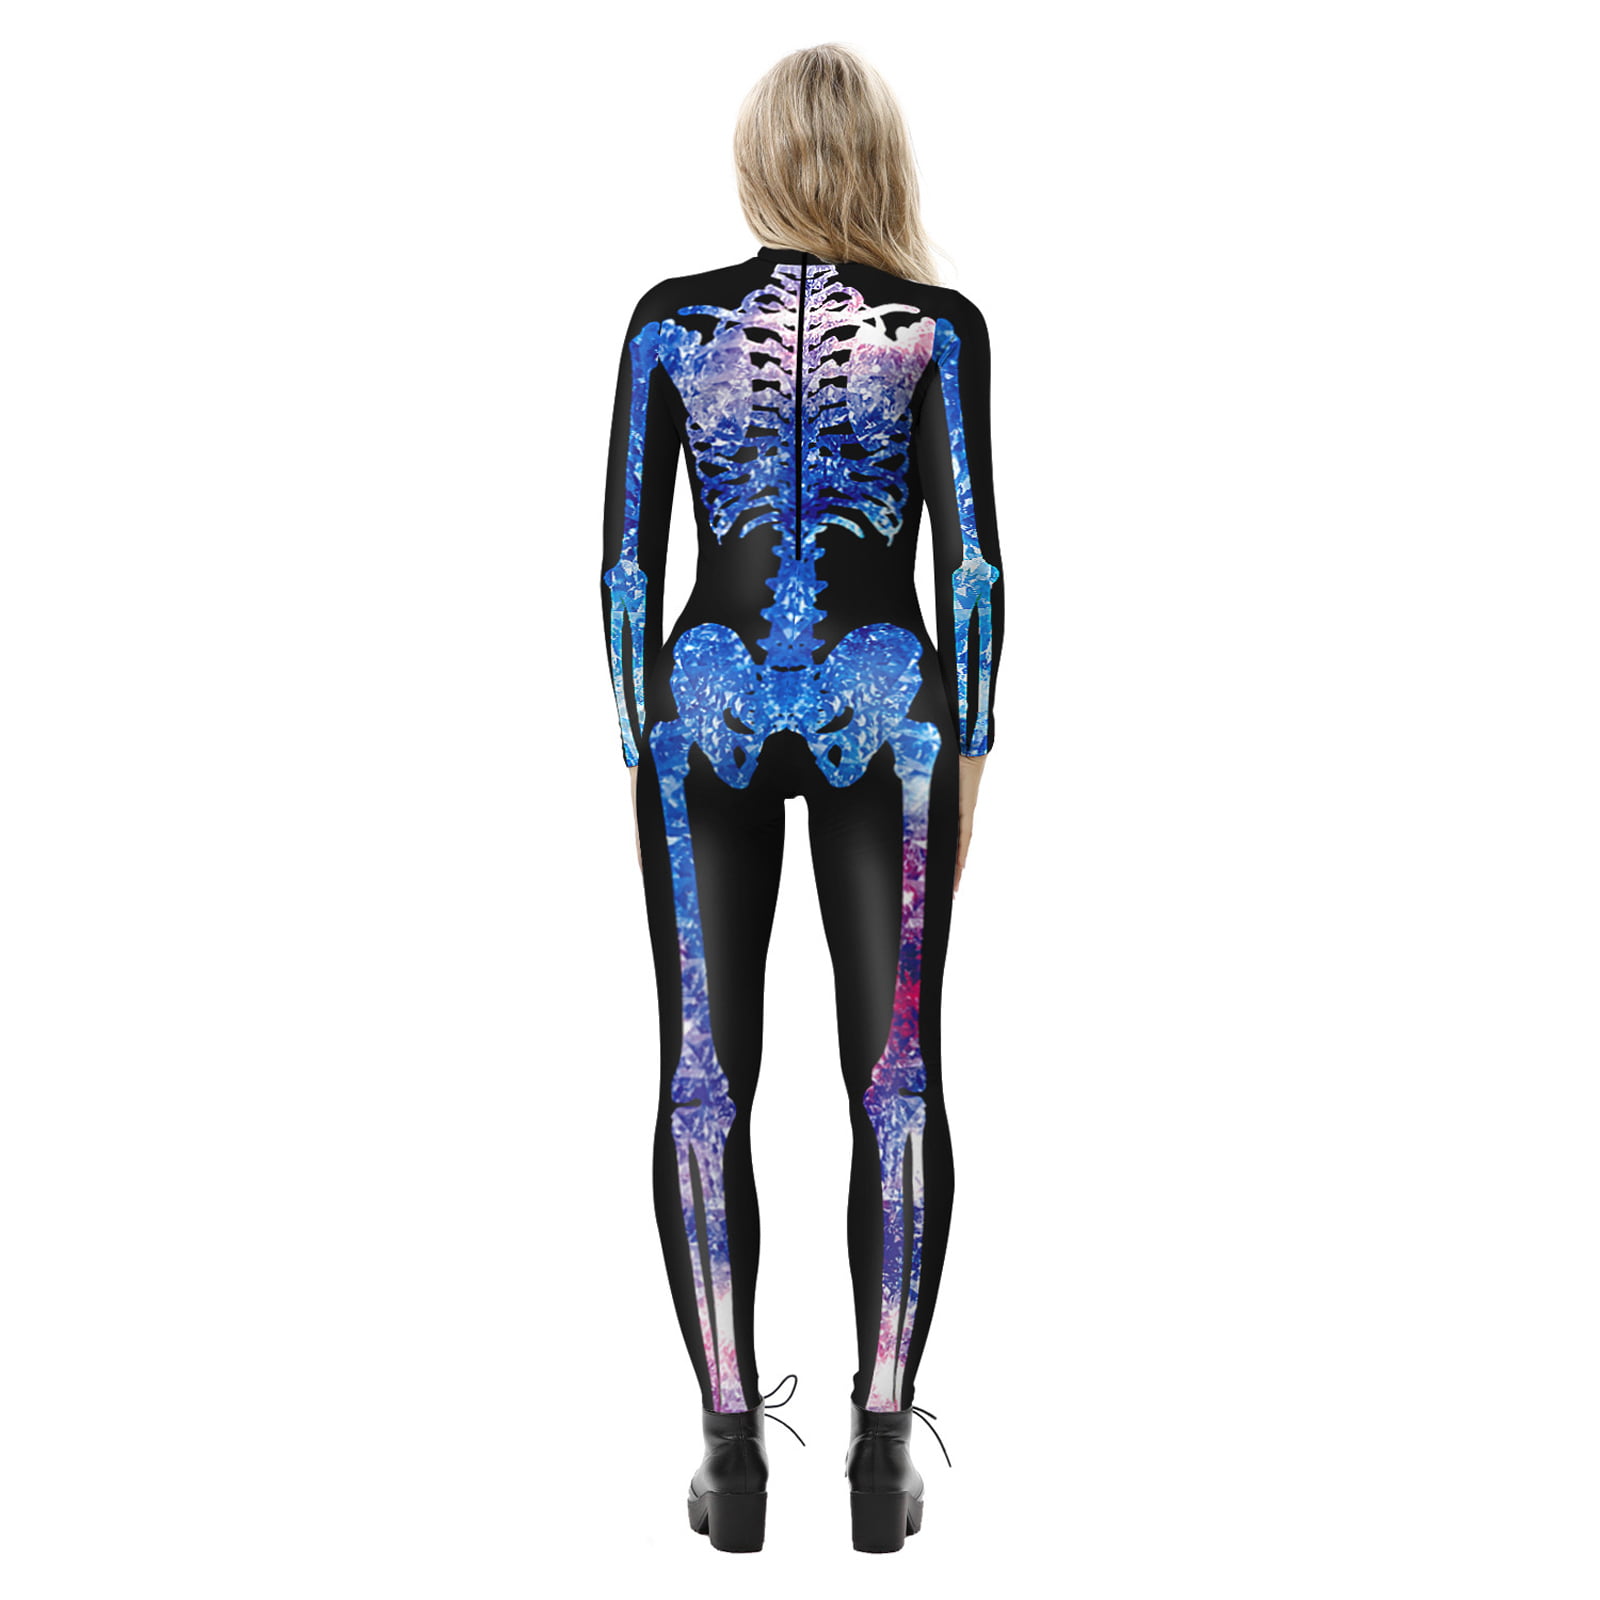 Womens Halloween Costume Skeleton Print Bodysuit Skinny Catsuit Jumpsuit Funny Long Sleeve Cosplay Bodycon Outfit